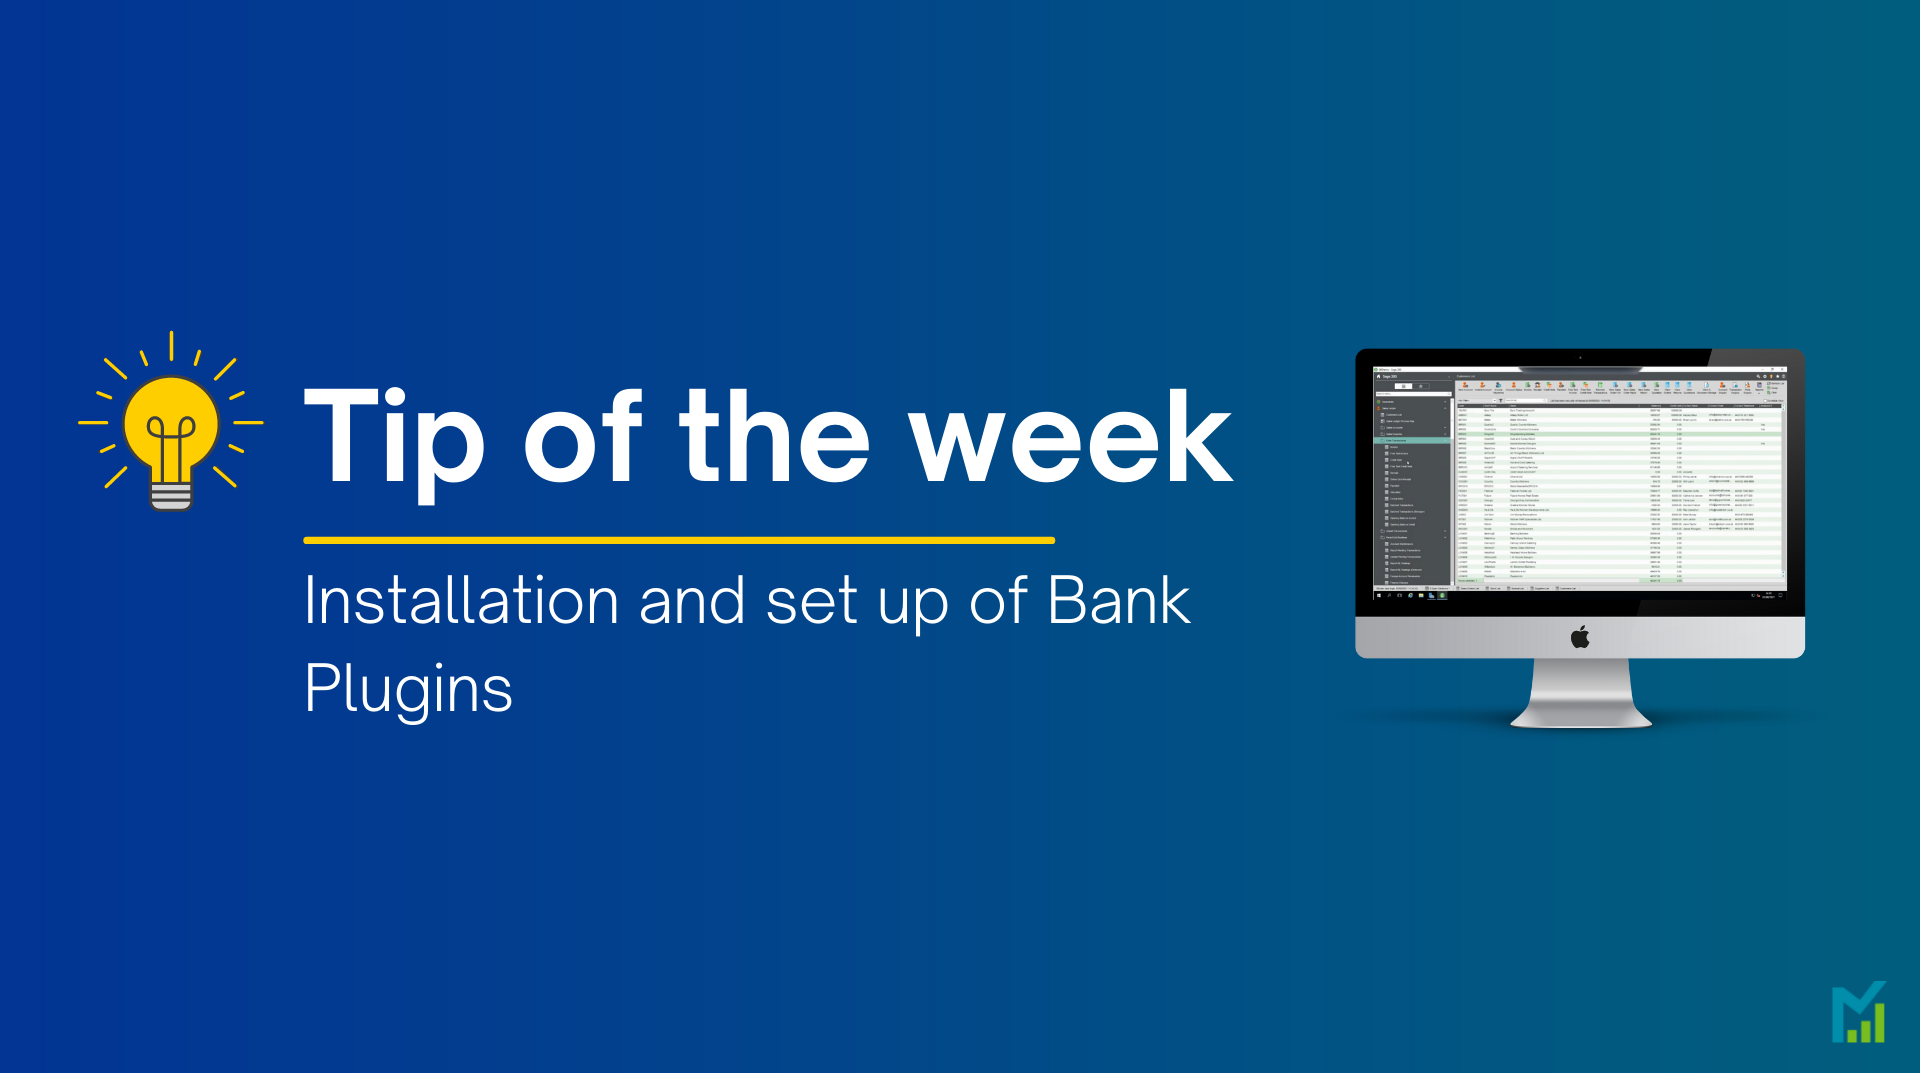 Installation and set up of Bank Plugins